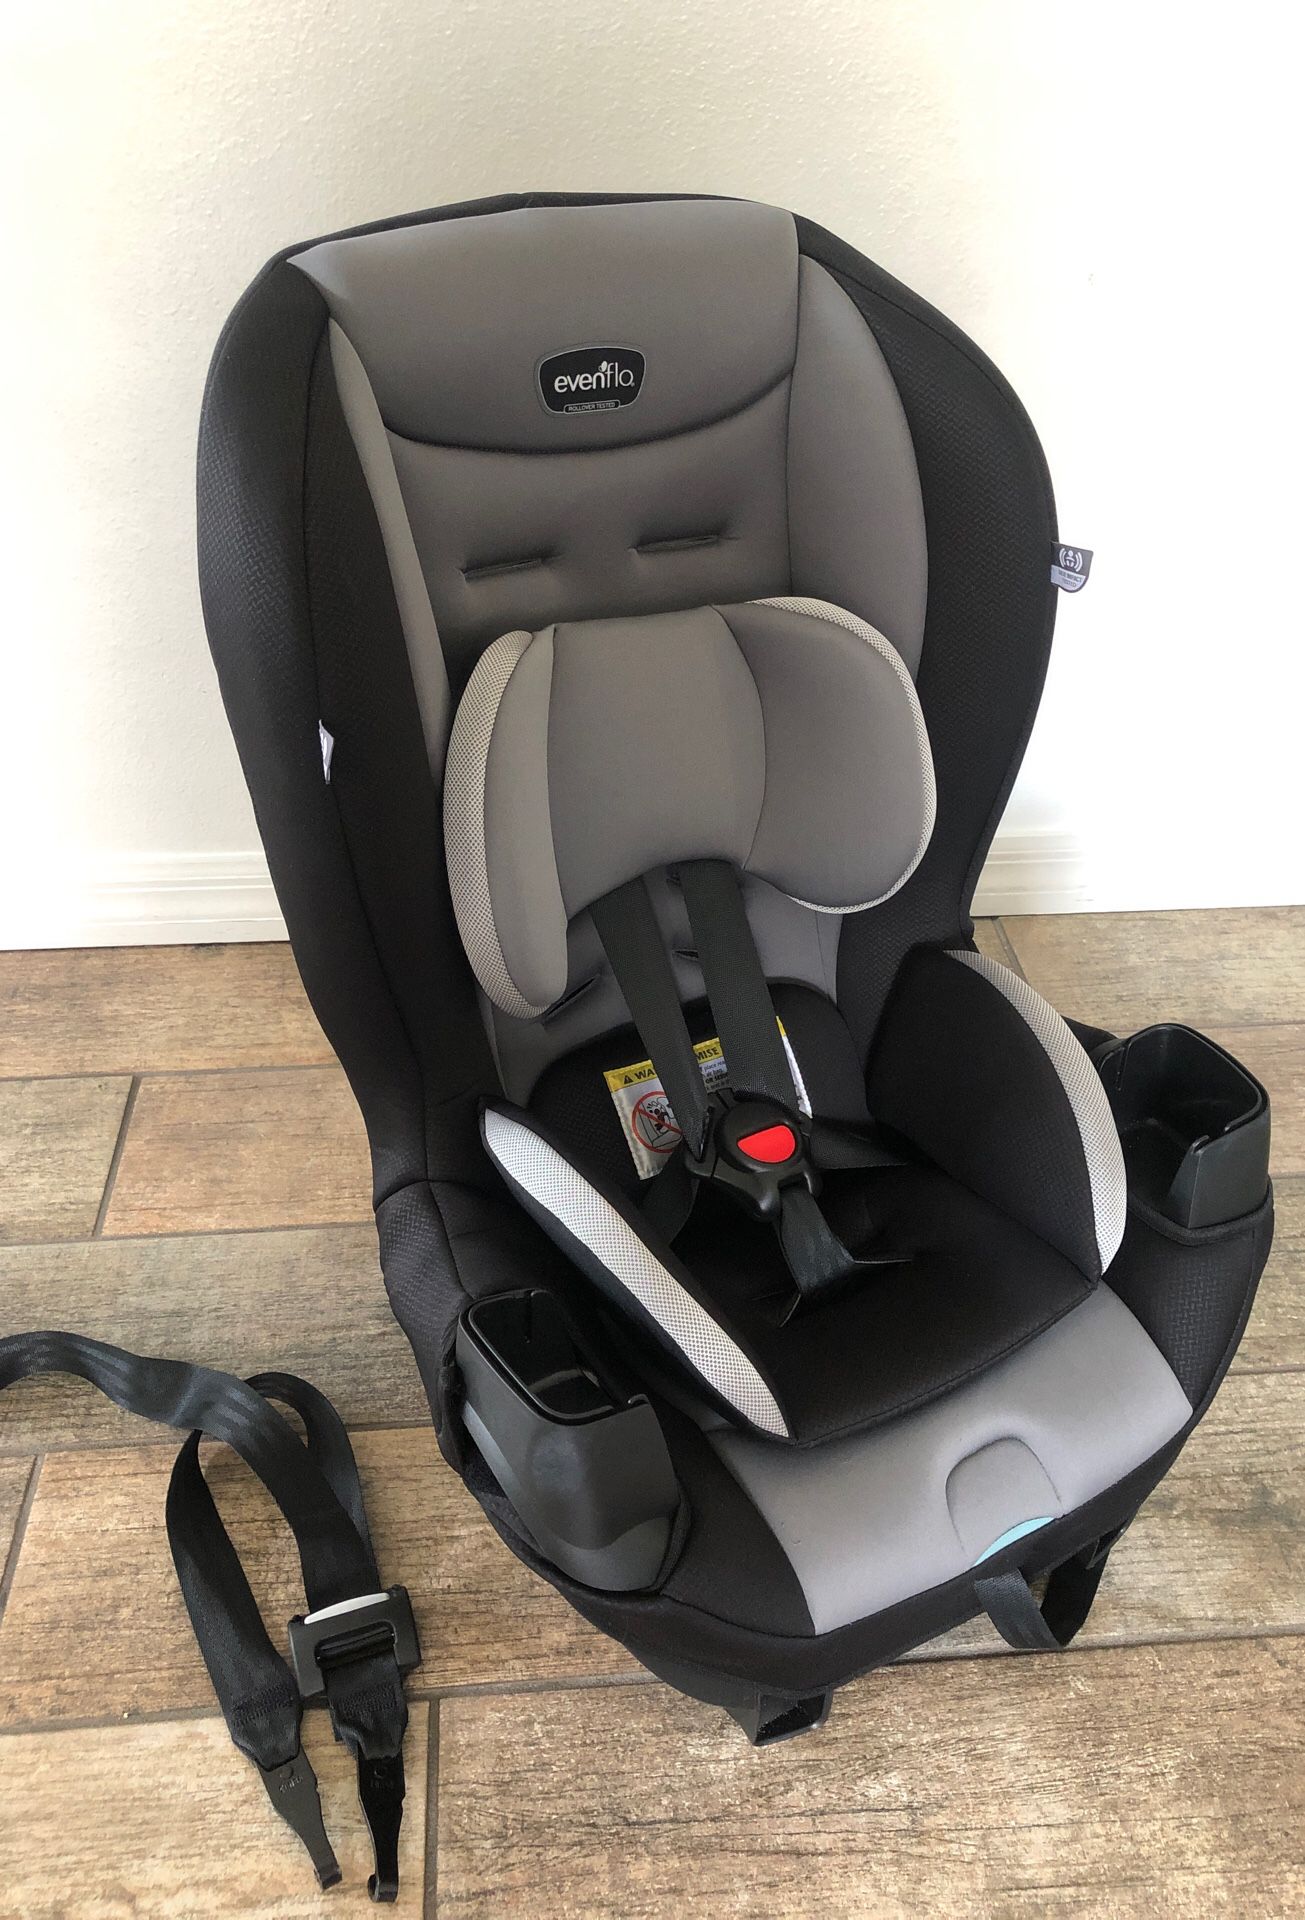 Evenflo Car Seat w/ double cup holder